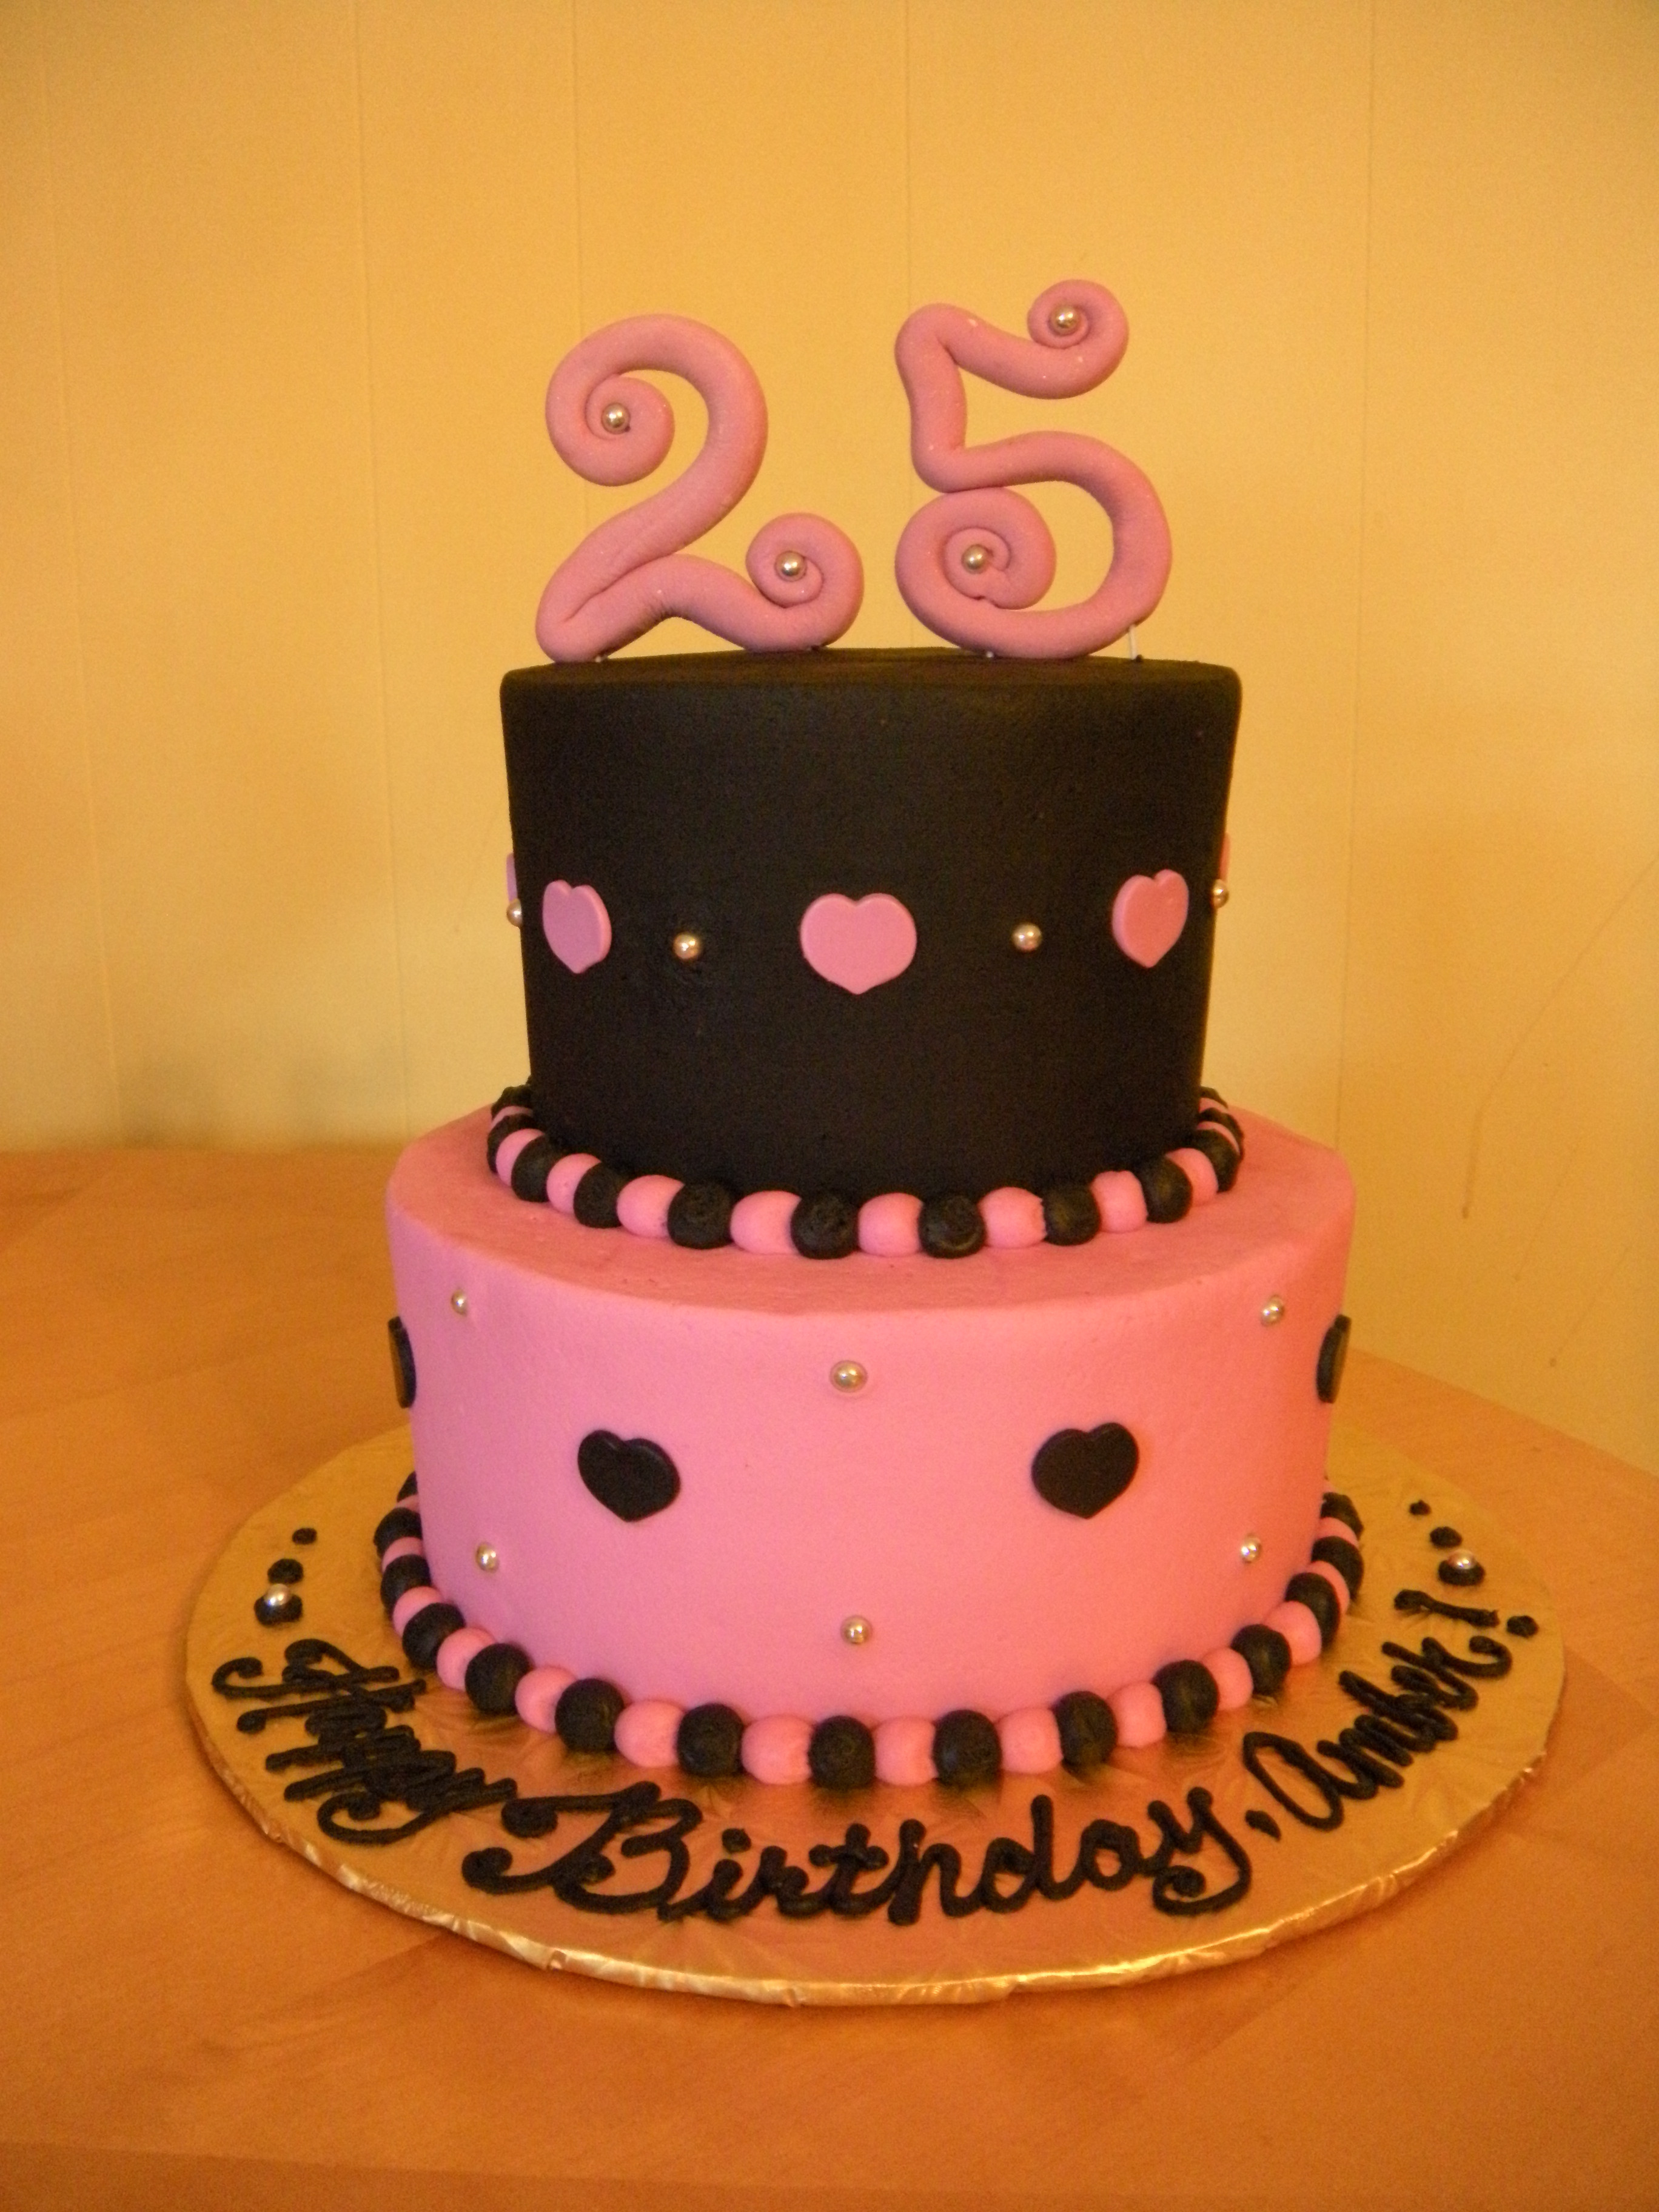 Best ideas about 25th Birthday Cake
. Save or Pin 25th birthday cake Now.